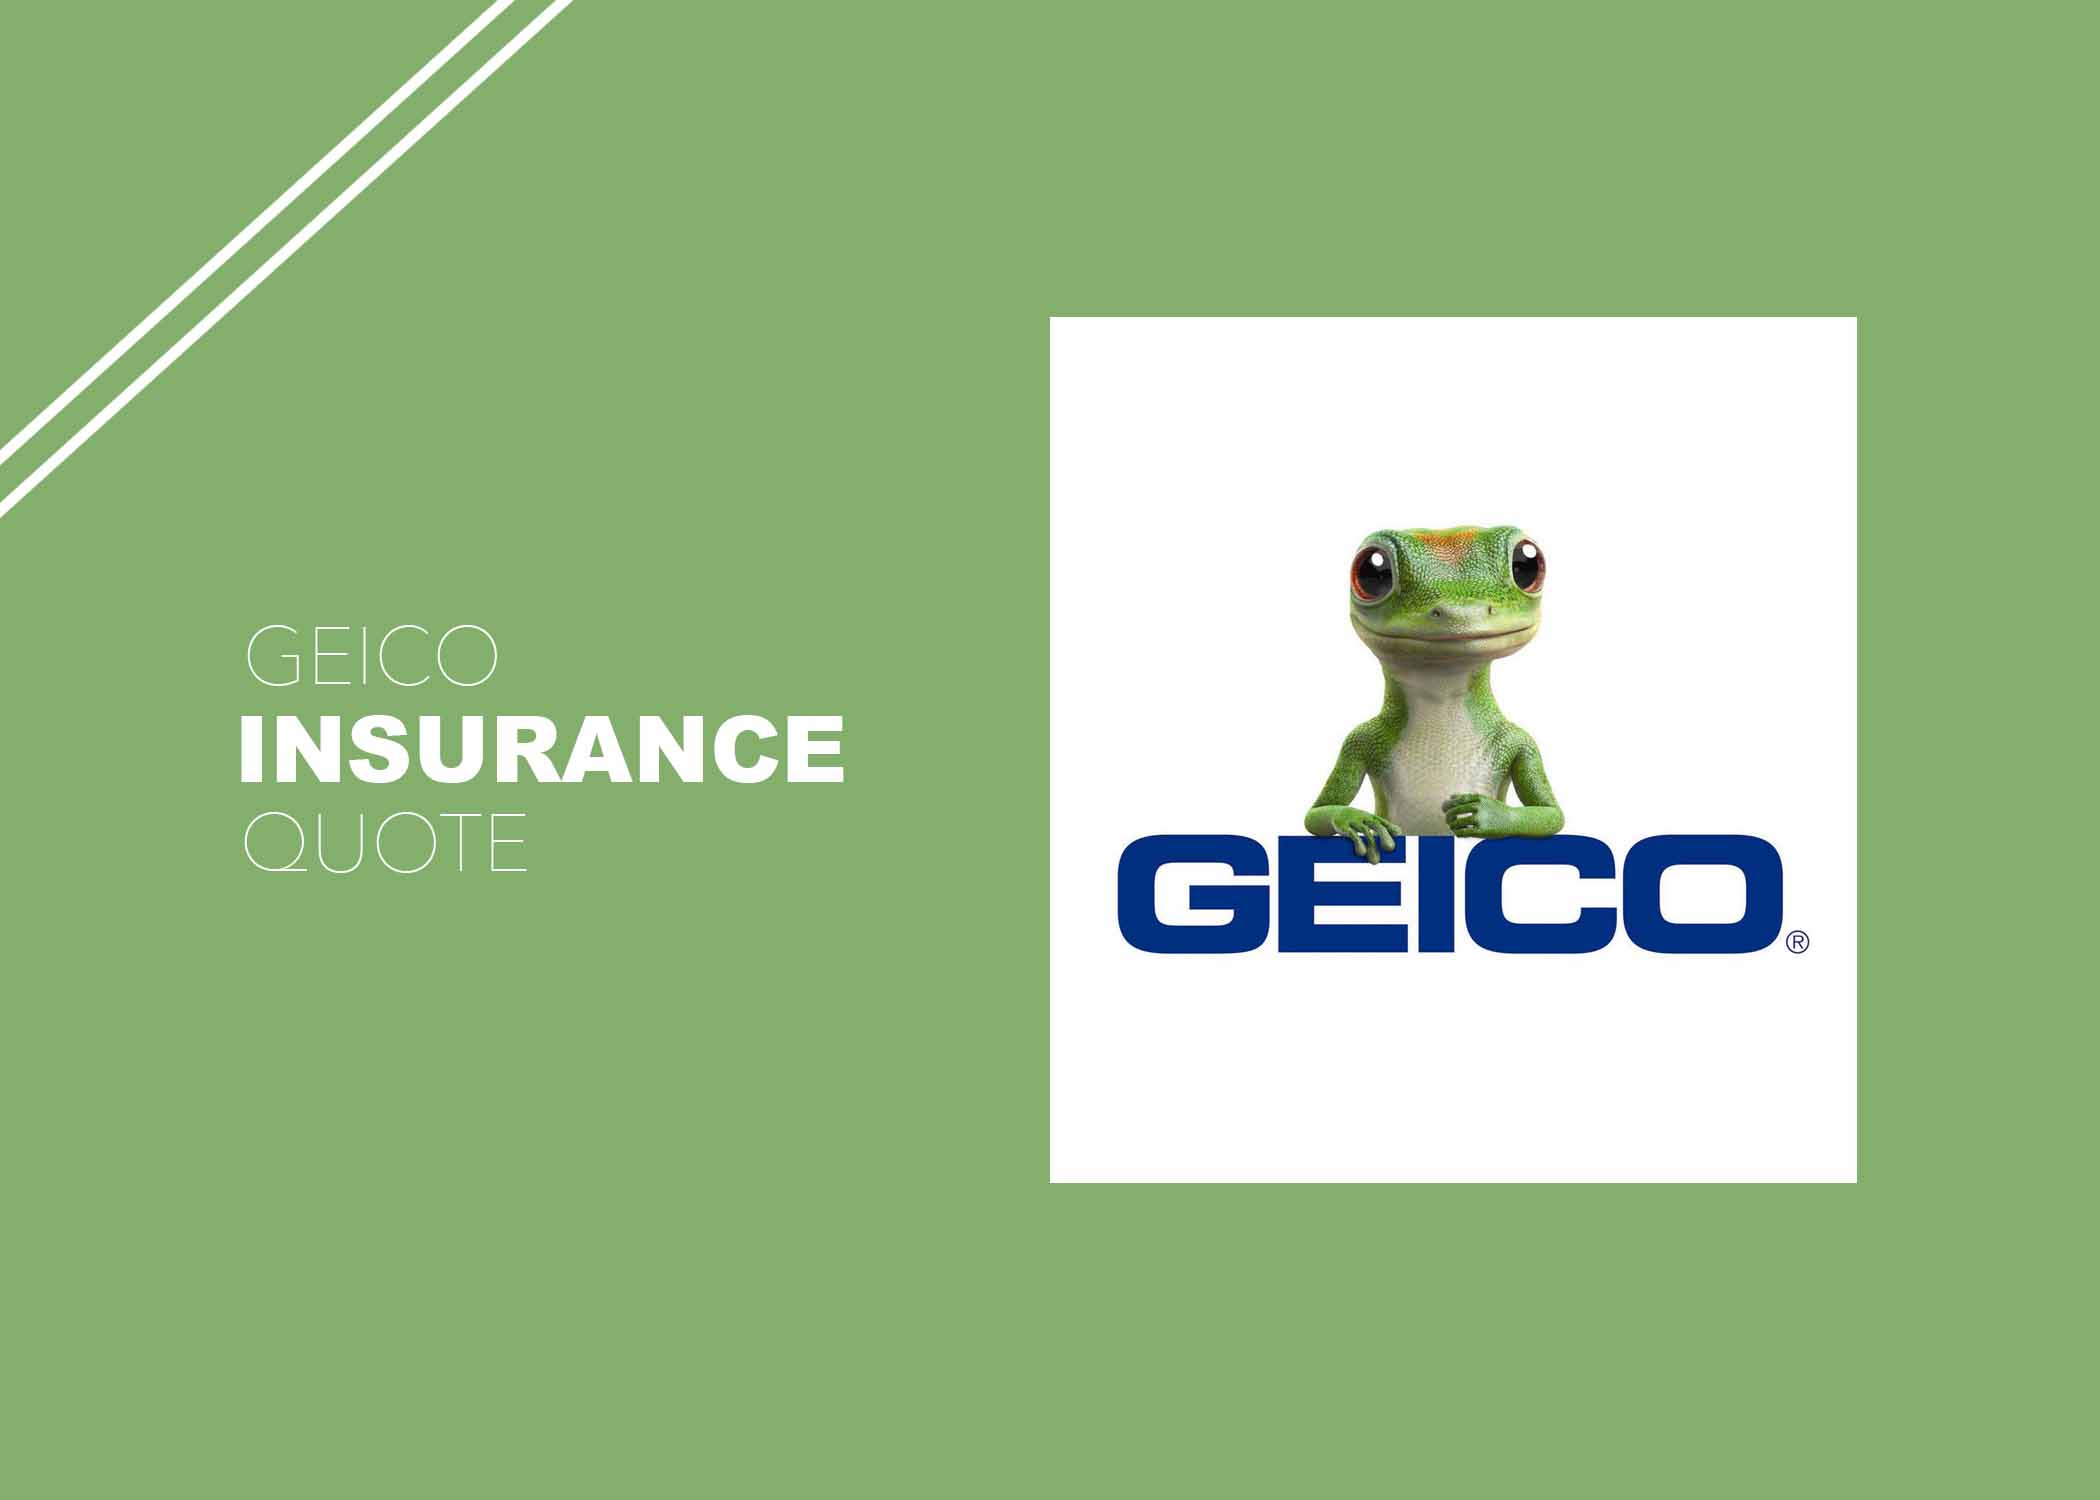 GEICO Insurance Quote 